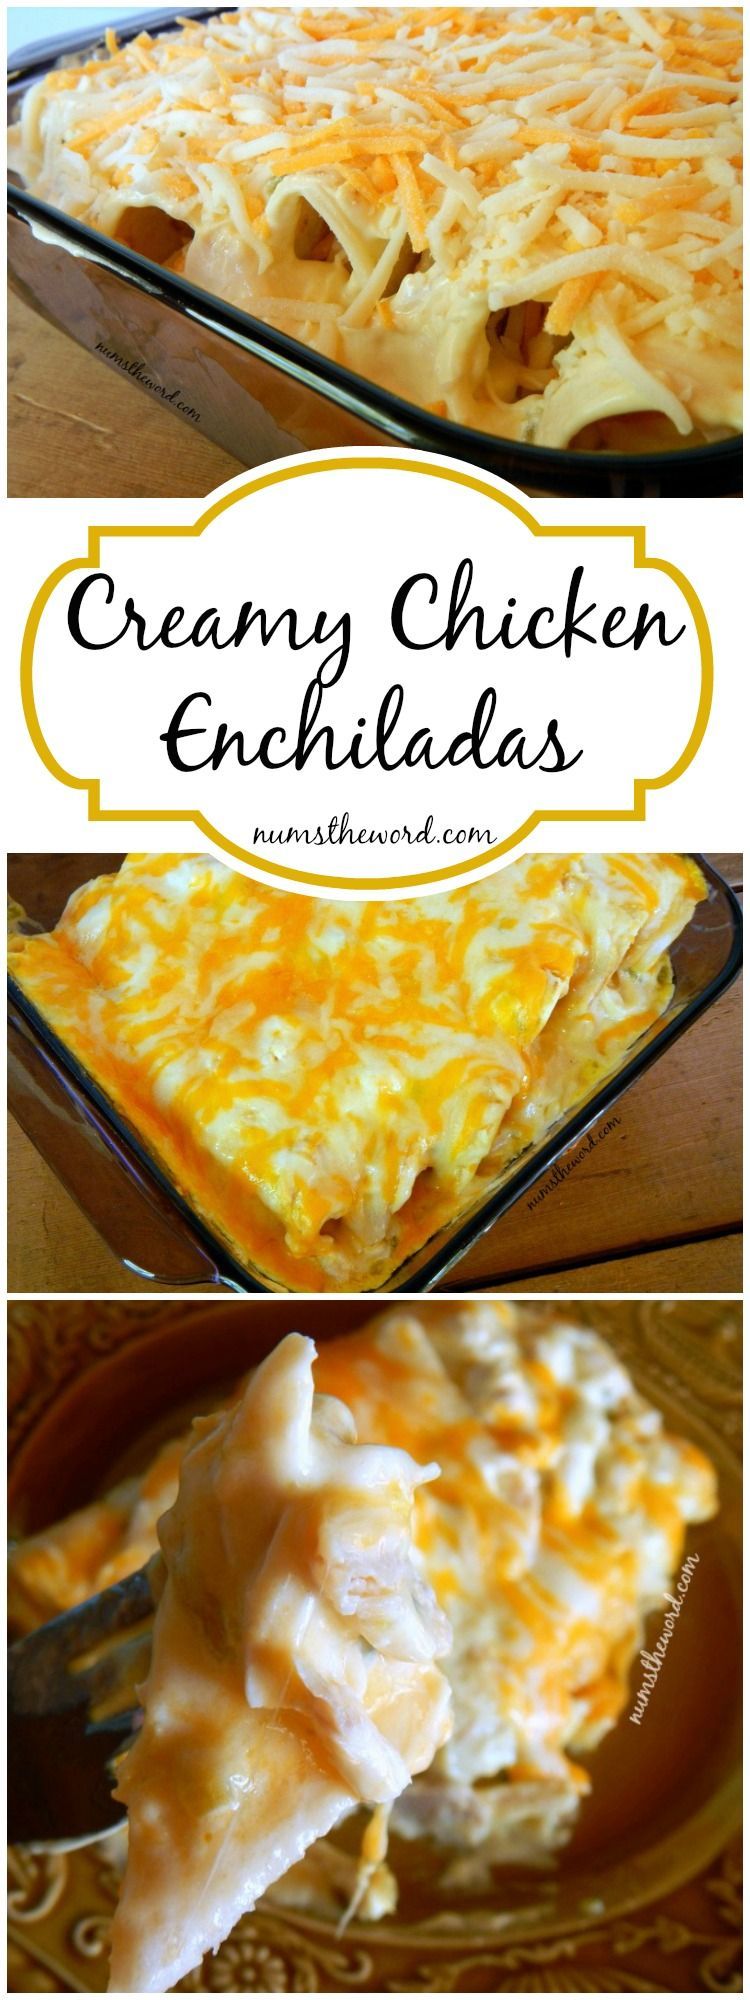 These simple non-traditional creamy chicken enchiladas are a huge hit with our family. 6 ingredients and 30 minutes is all you need for an awesome meal! -   23 mexican recipes enchiladas
 ideas